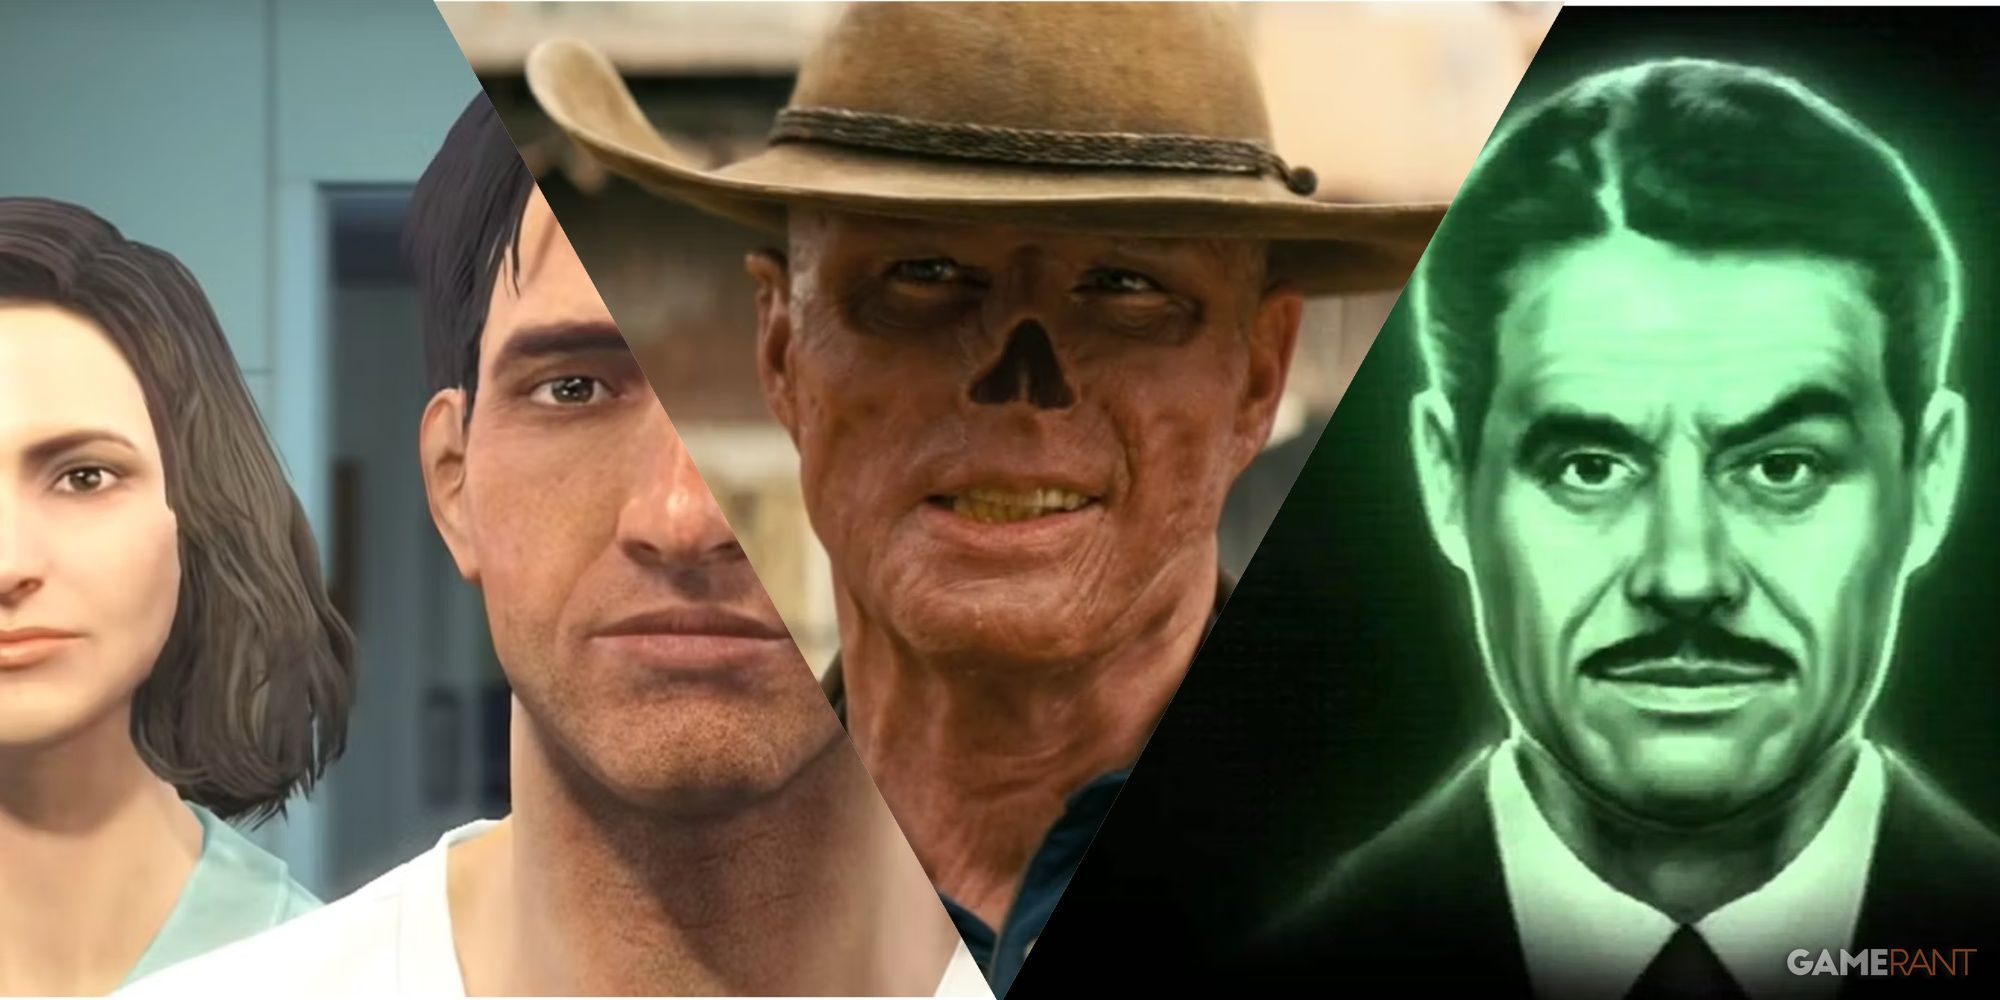 Sole Survivor from Fallout 4, The Ghoul from the Amazon Show, and Mr. House from New Vegas